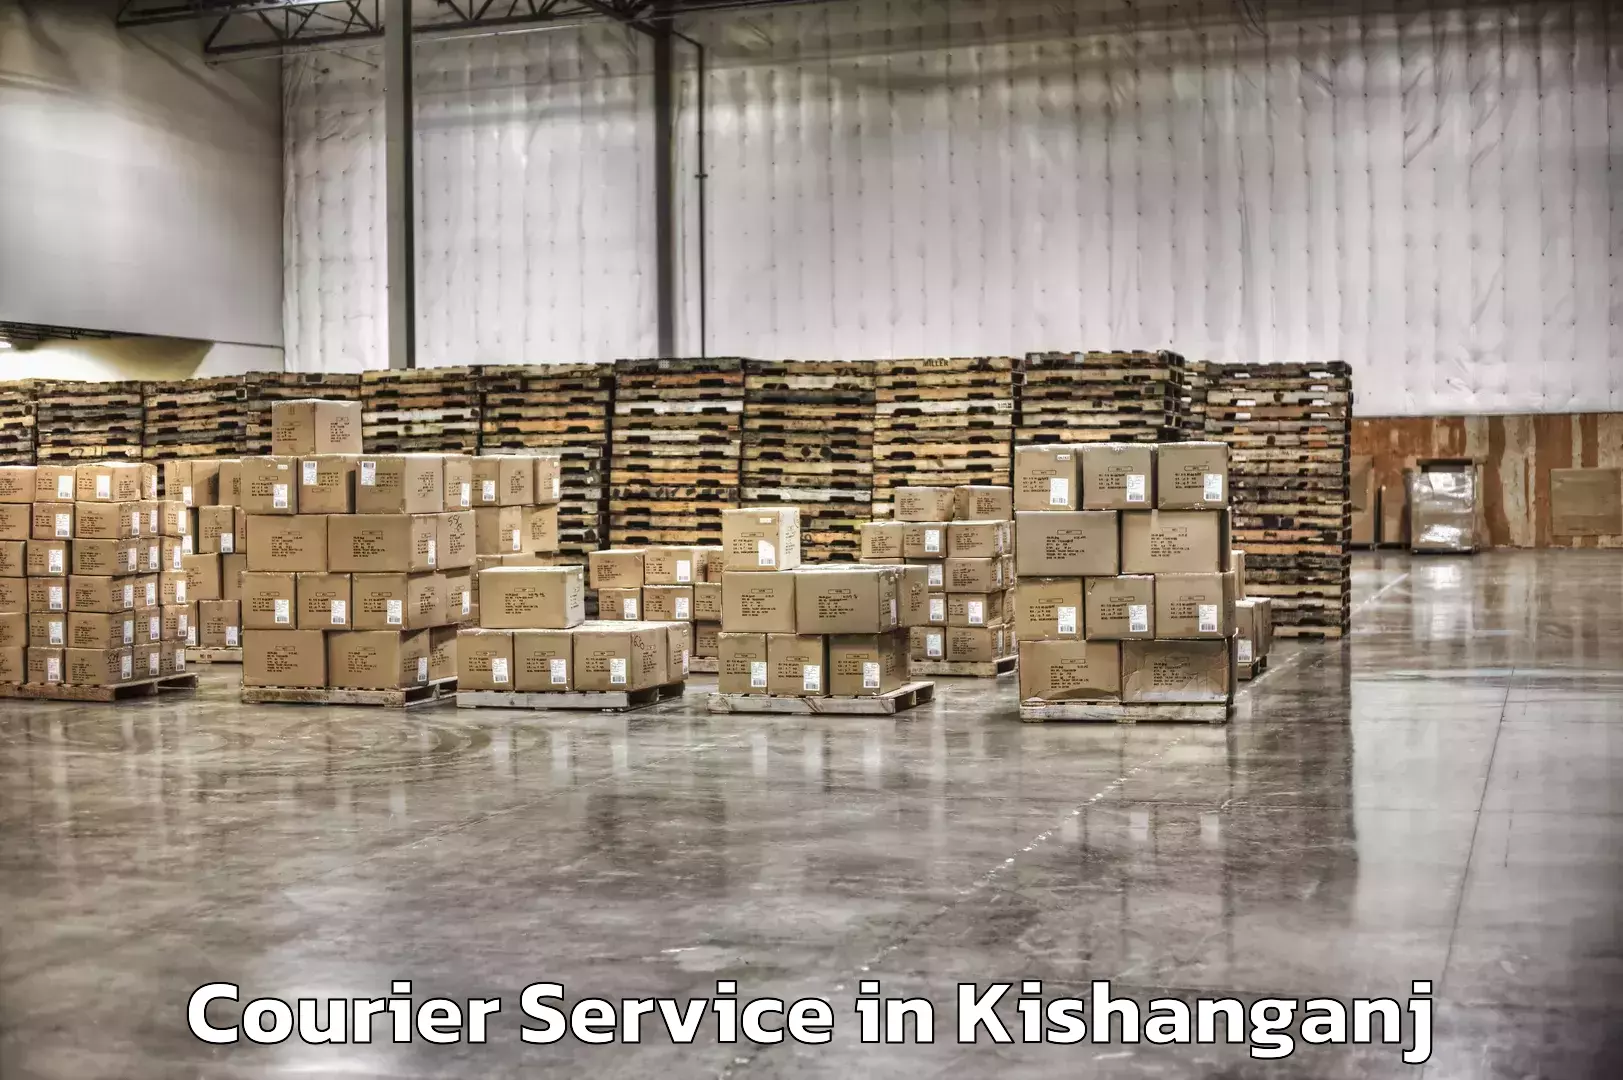 Enhanced delivery experience in Kishanganj